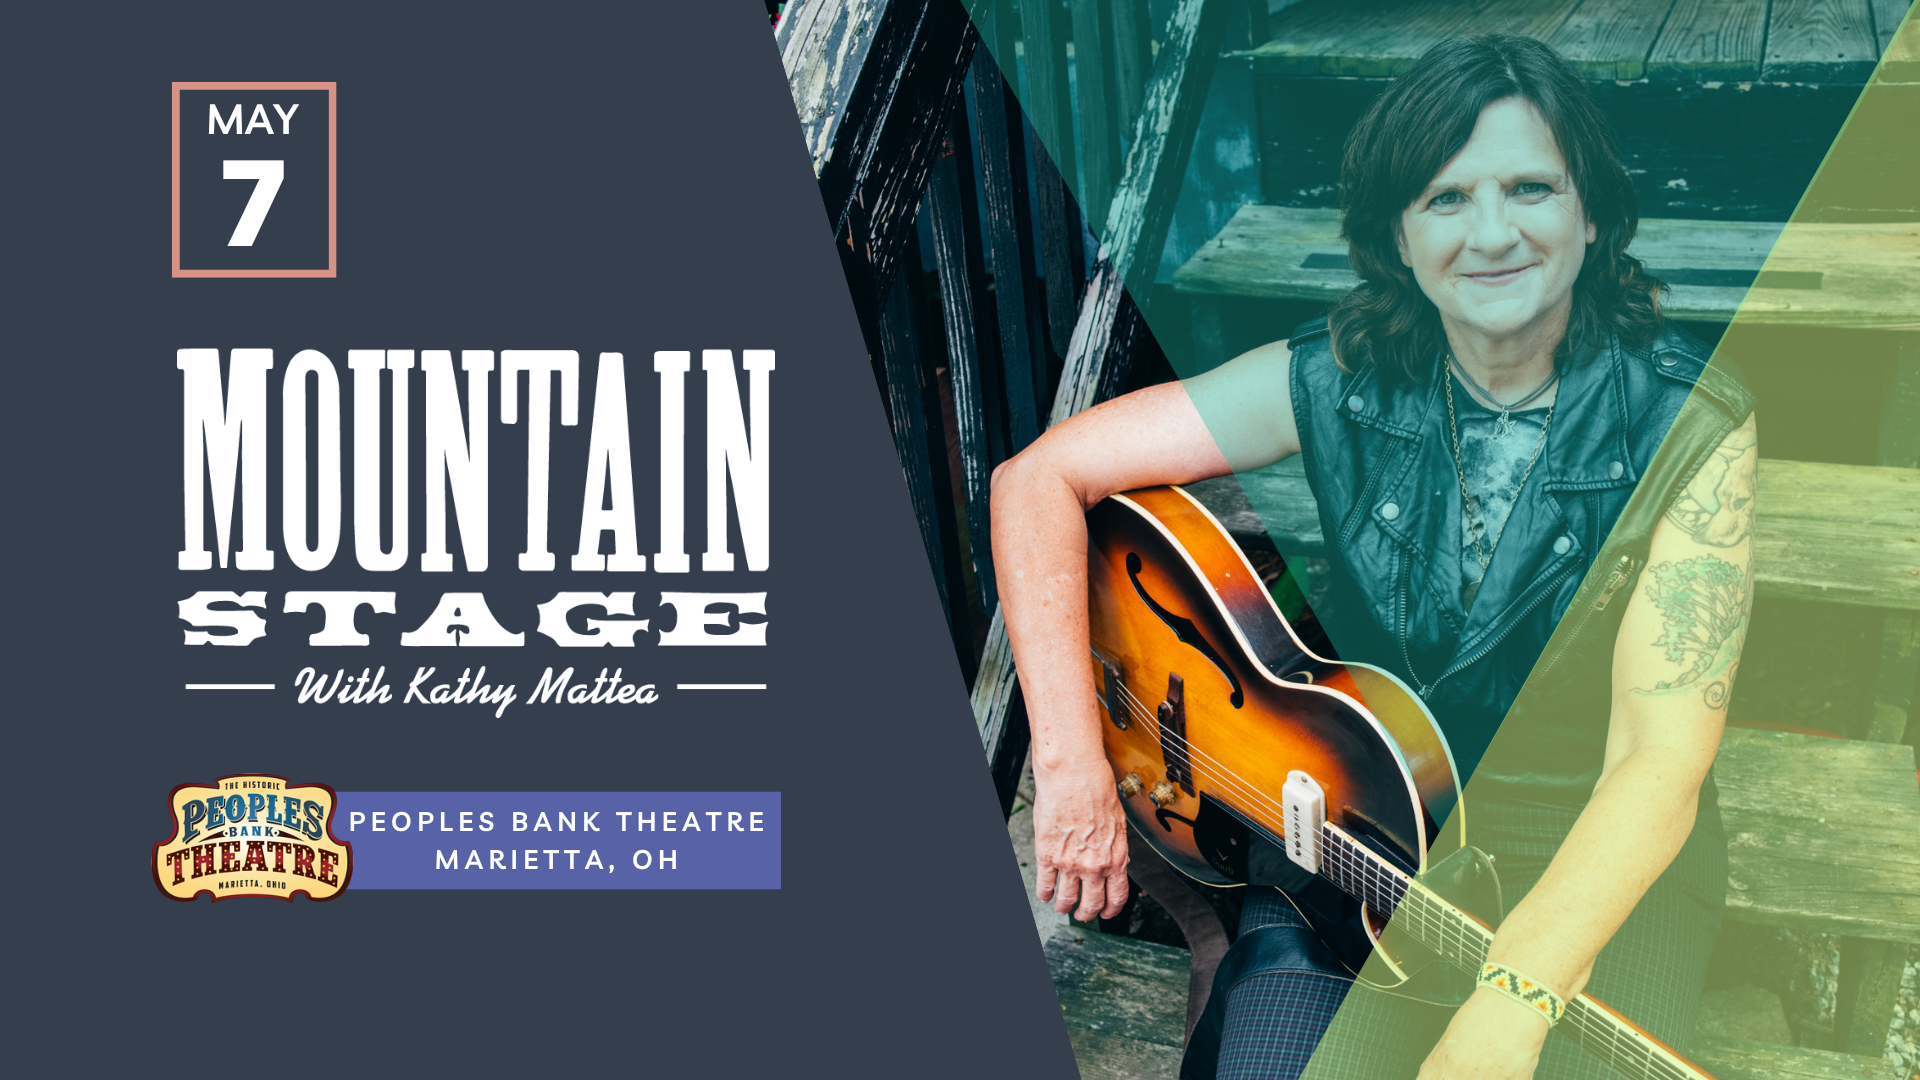 A promotional image for the May 7 taping of Mountain Stage coming to Marietta's Peoples Bank Theatre.